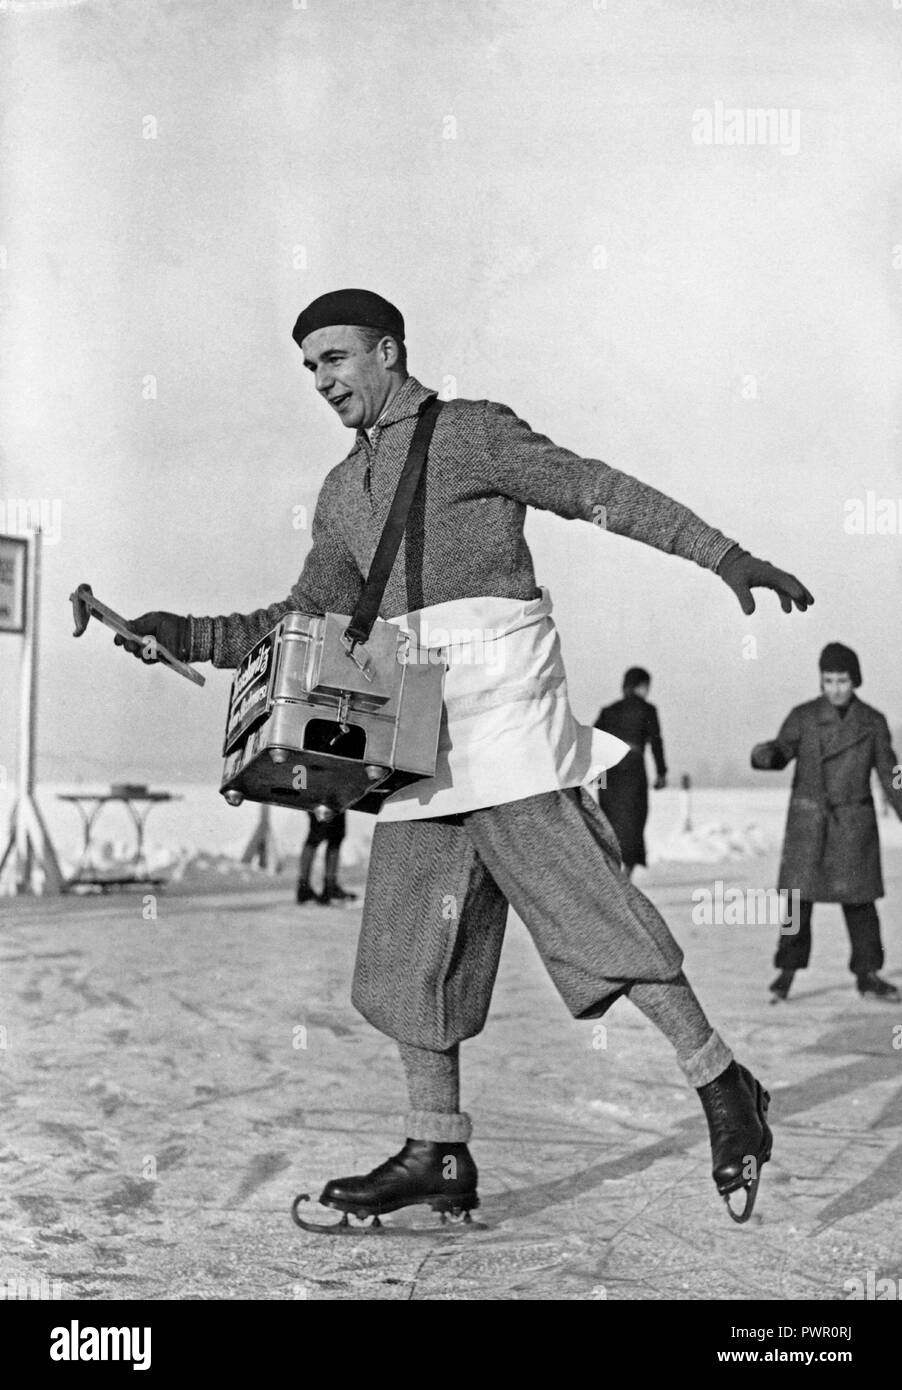 skating-hot-dog-salesman-a-man-selling-sausages-is-skating-on-the-ice-a-winter-day-the-box-hanging-in-front-of-him-contains-the-hot-dogs-1930s-PWR0RJ.jpg